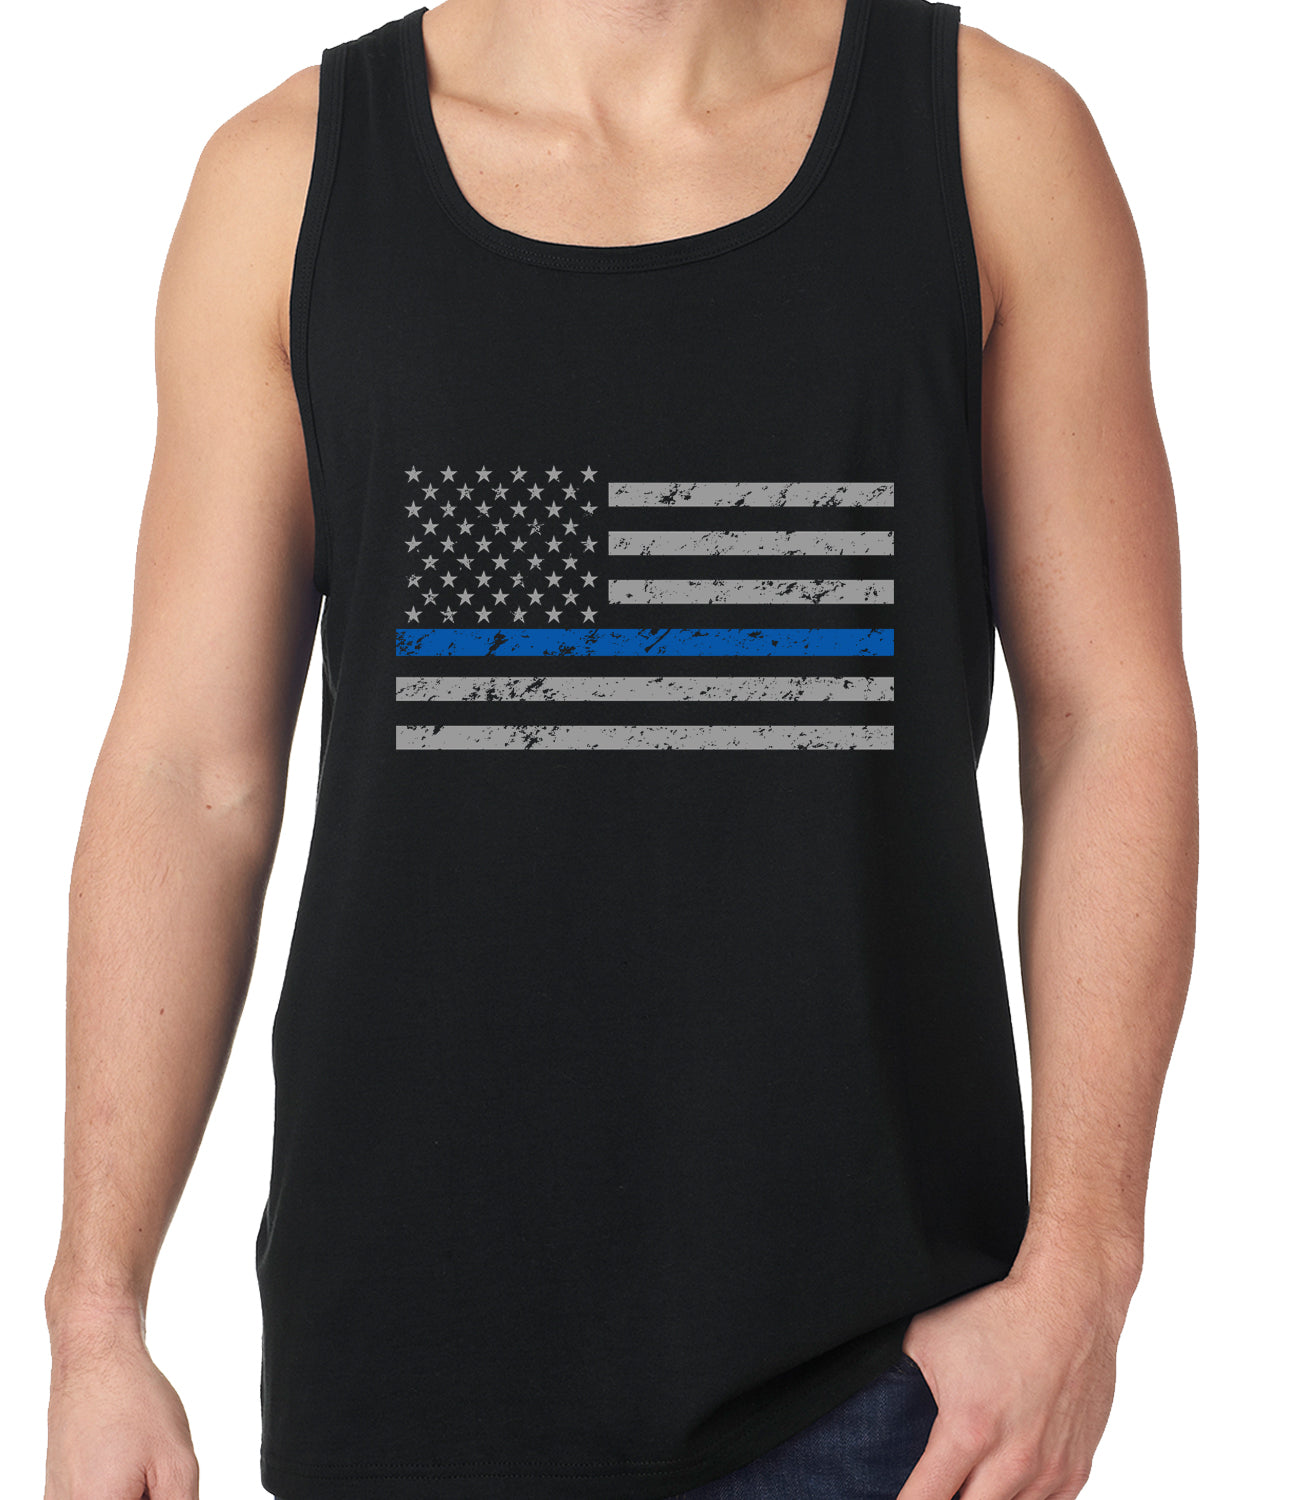 Police Thin Blue Line American Flag - Support Police Department Horizontal Tanktop